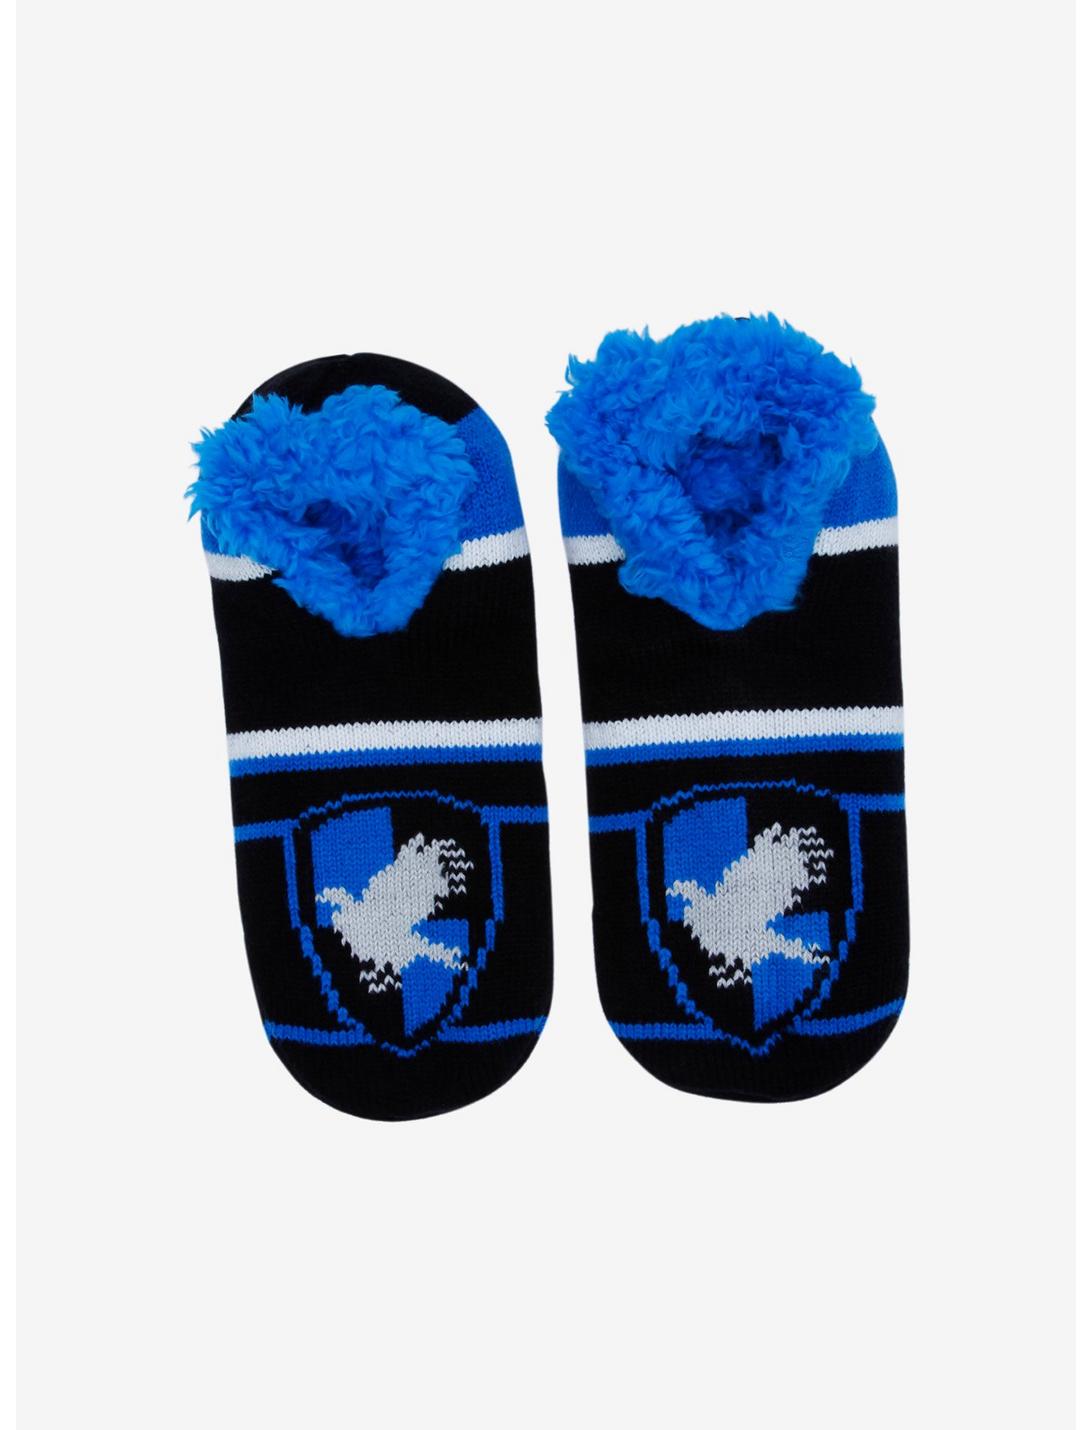 Harry Potter Ravenclaw Cozy Slippers, , hi-res